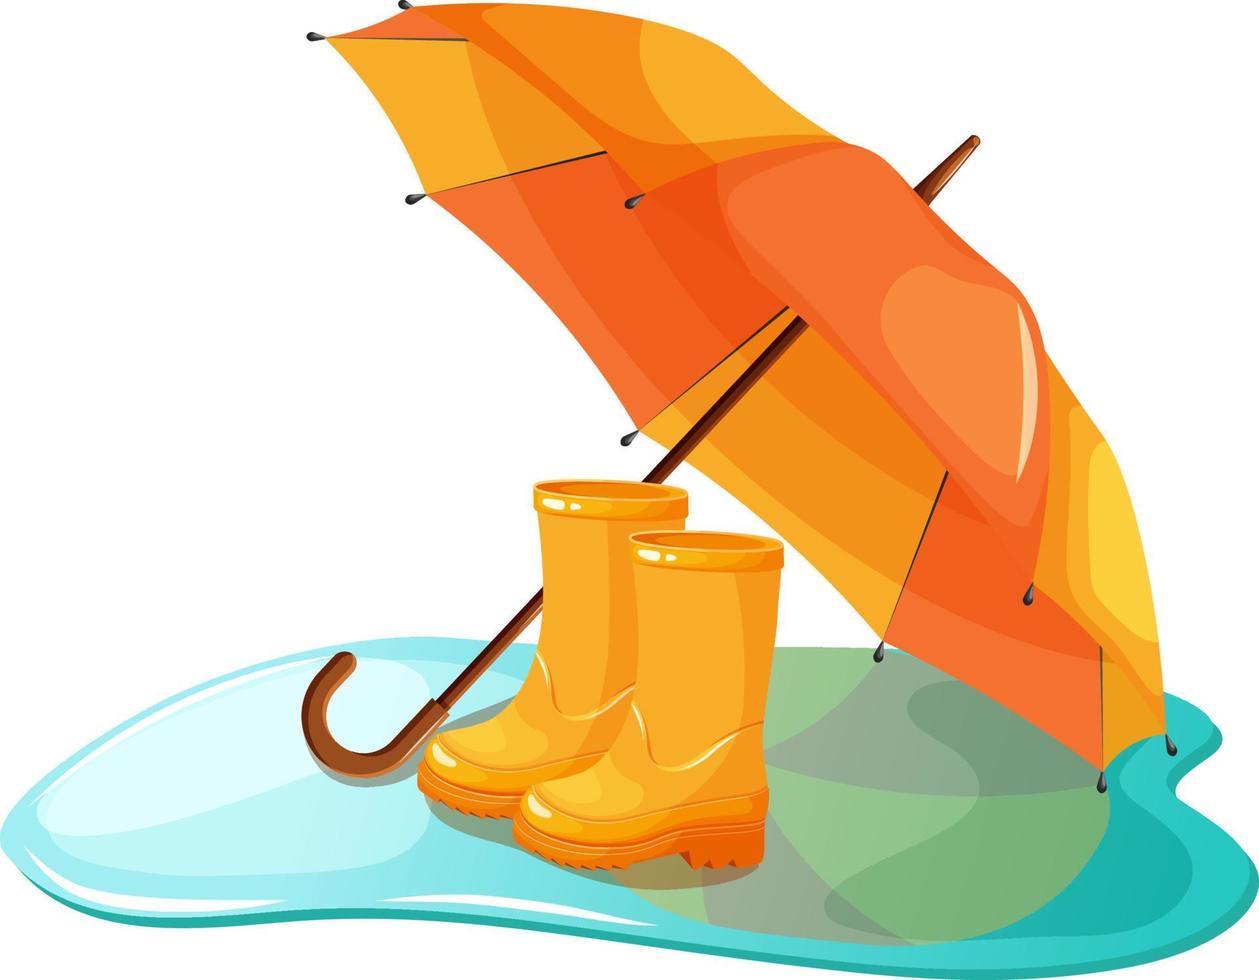 Bright yellow-orange umbrella with yellow rubber boots on puddle. Rainy weather. Umbrella with boots vector